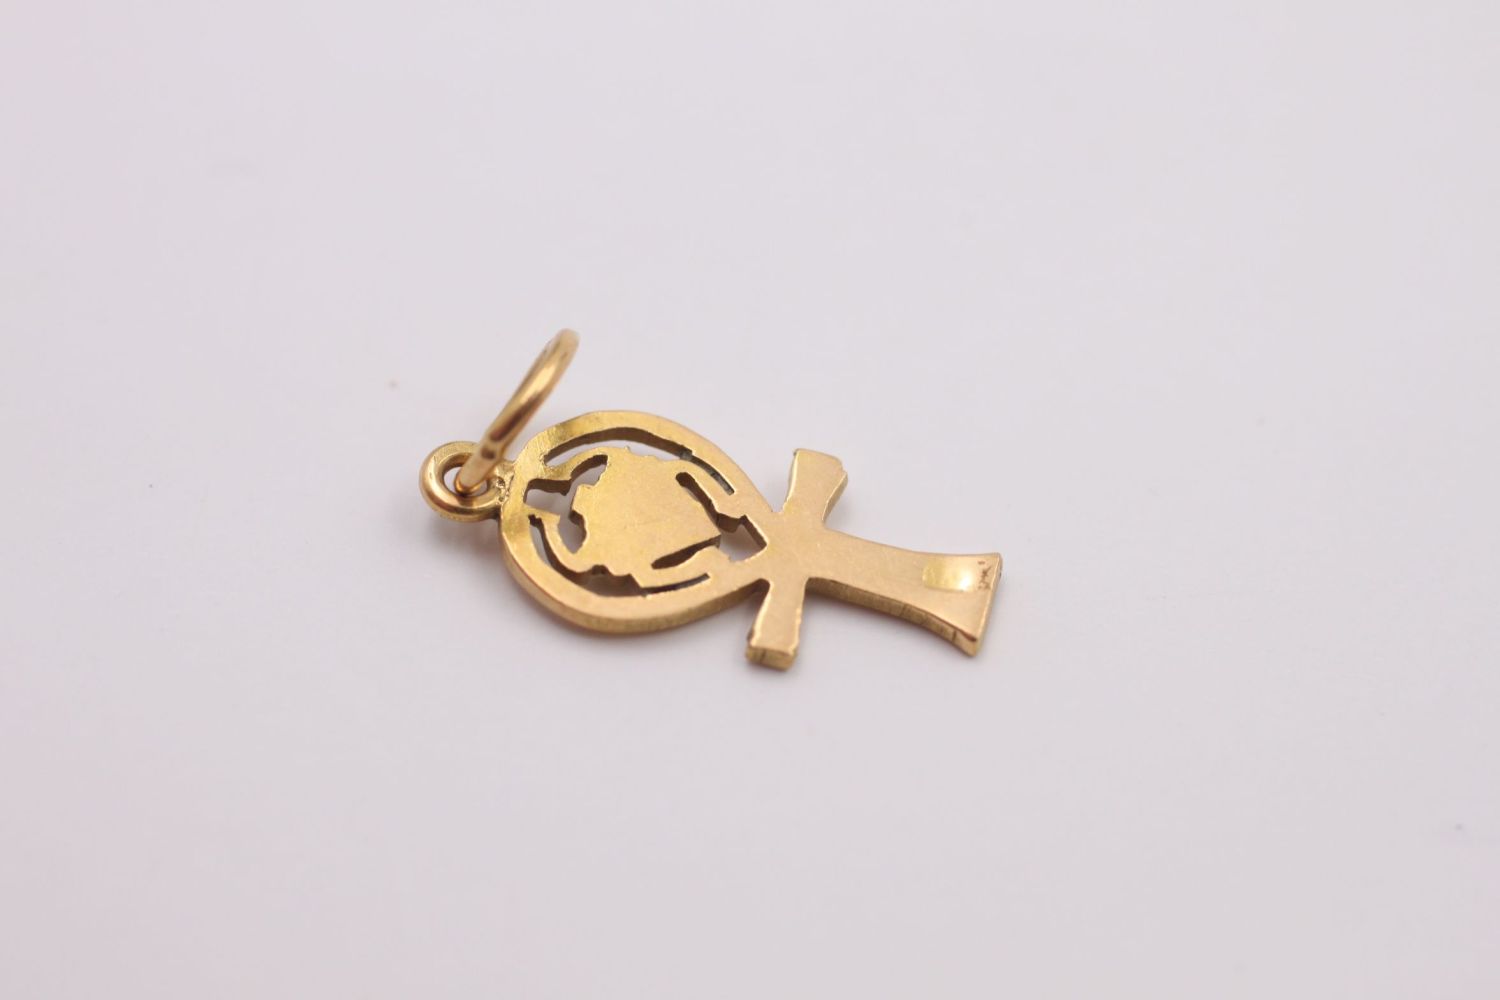 18ct gold Egyptian Ankh scarab pendant / charm 1 grams gross - Image 4 of 4